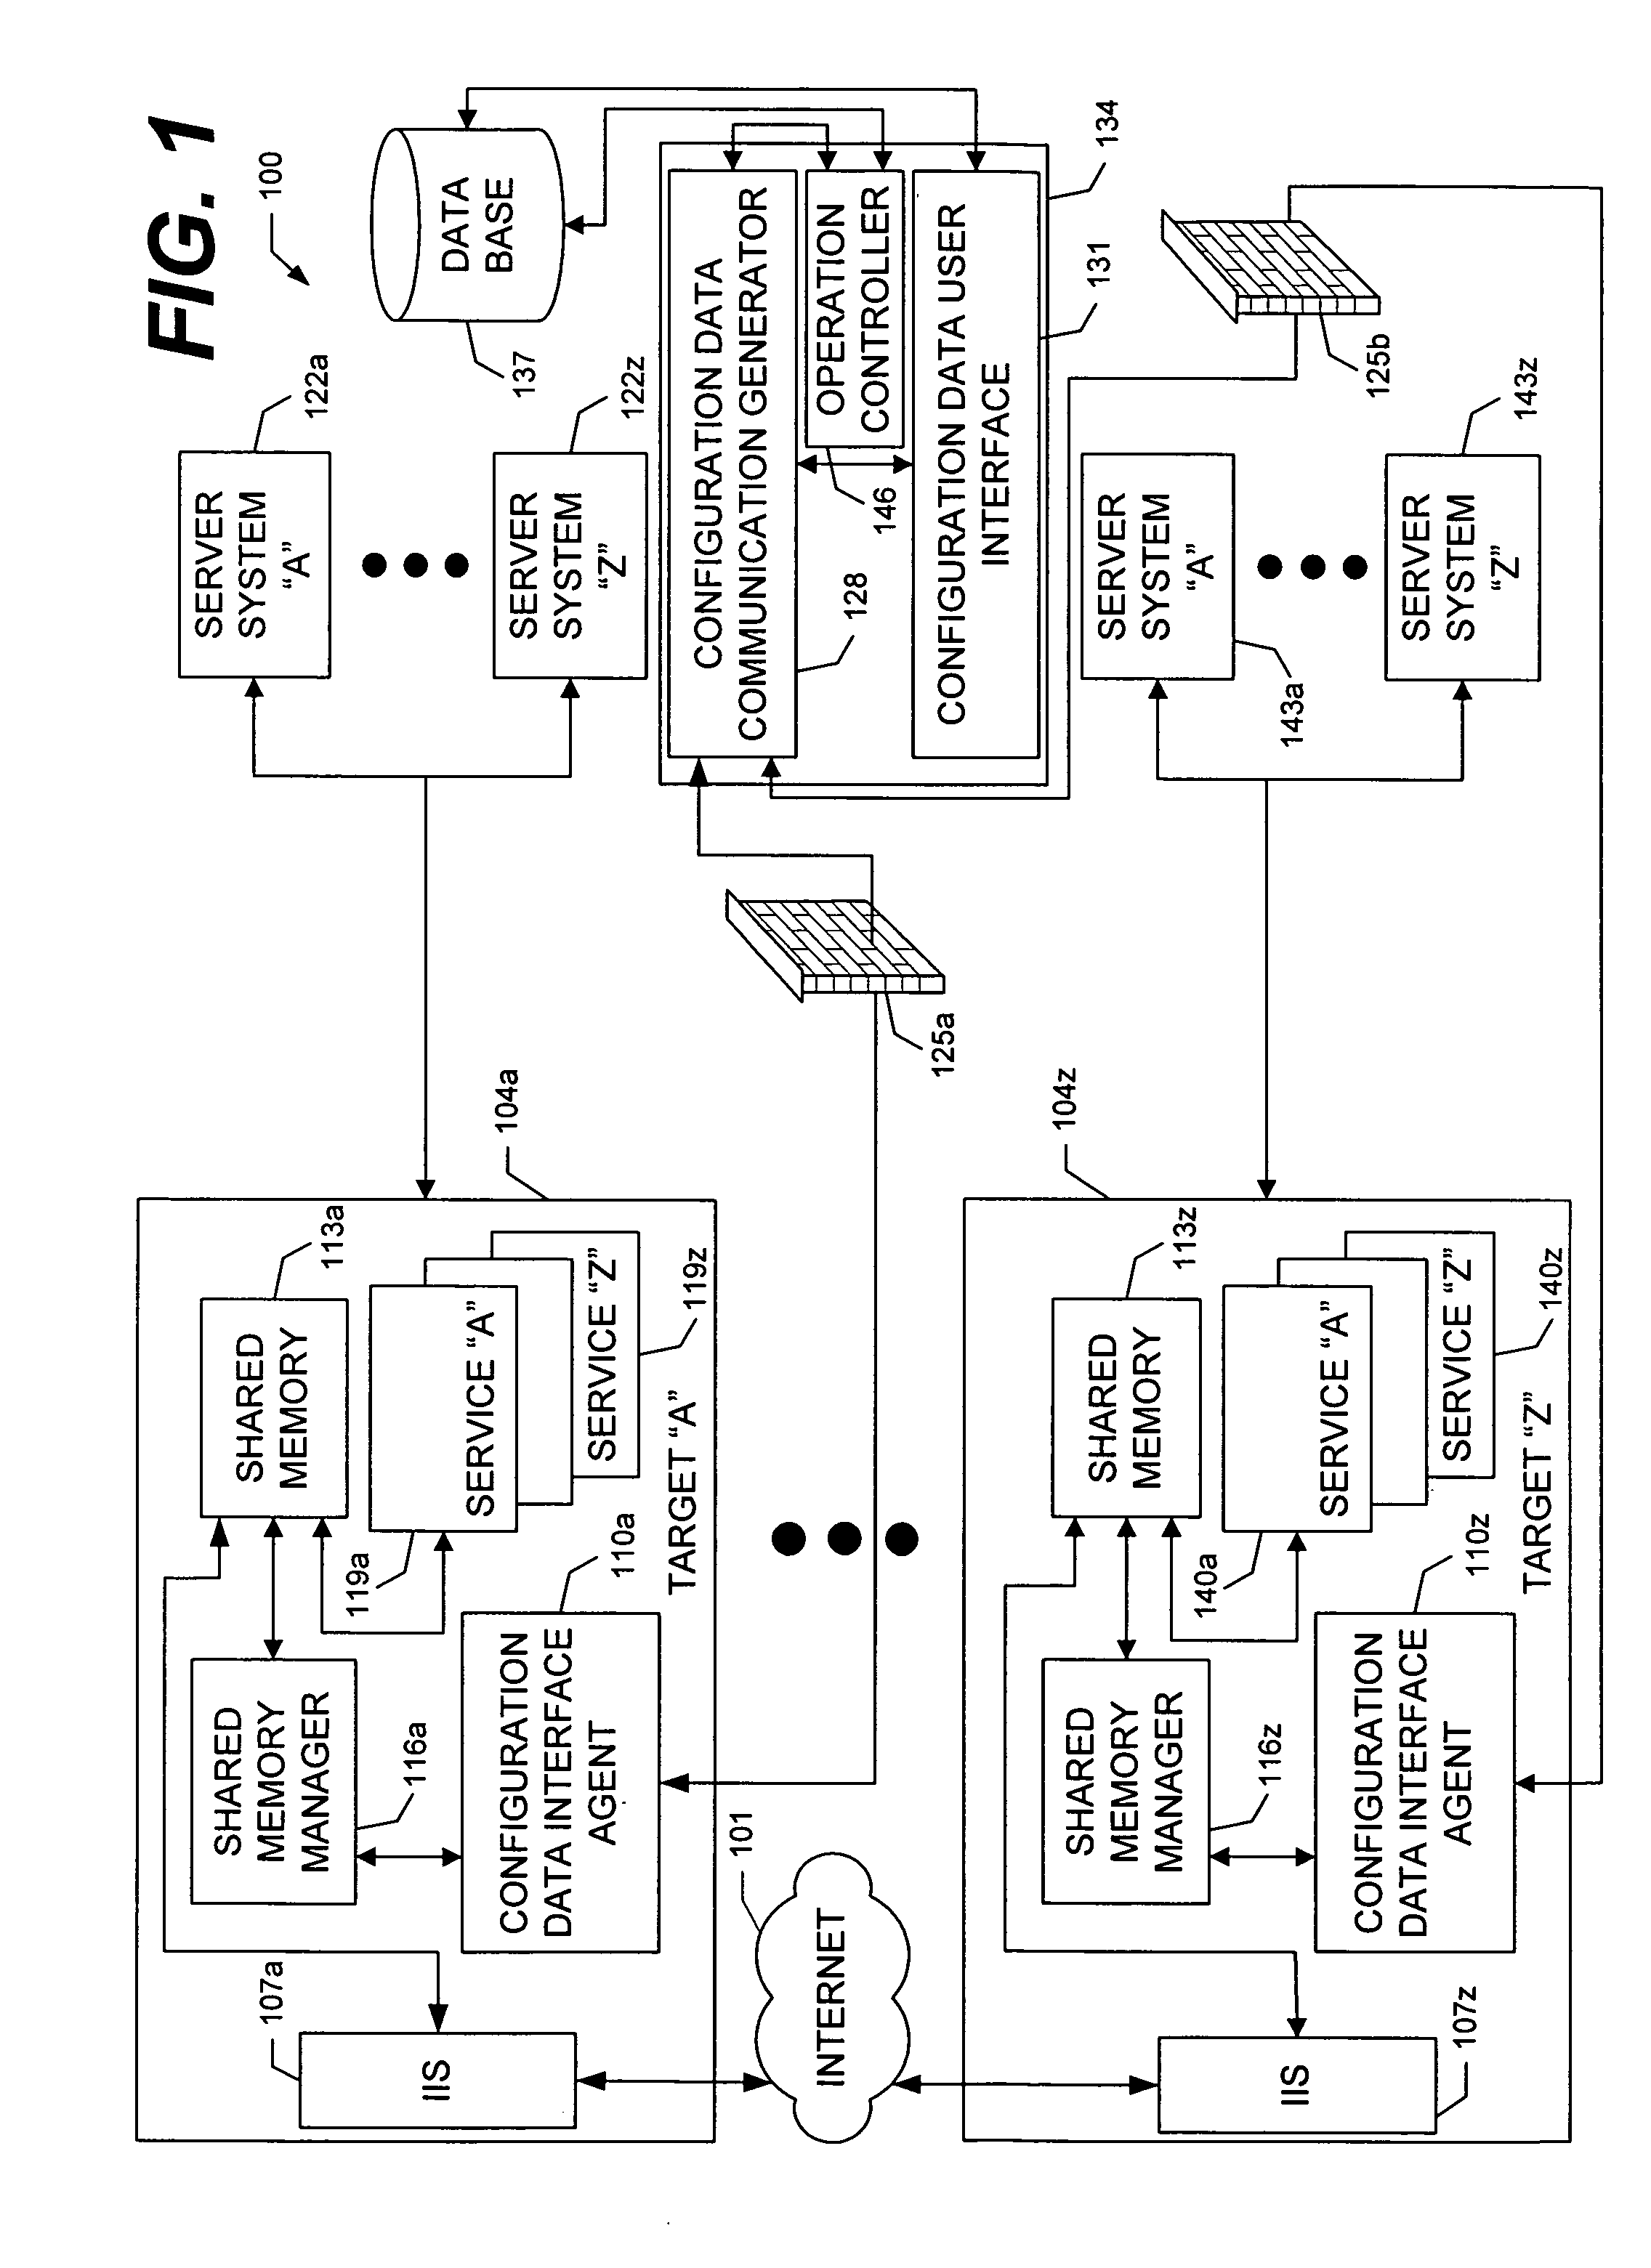 System and methods for sharing configuration information with multiple processes via shared memory